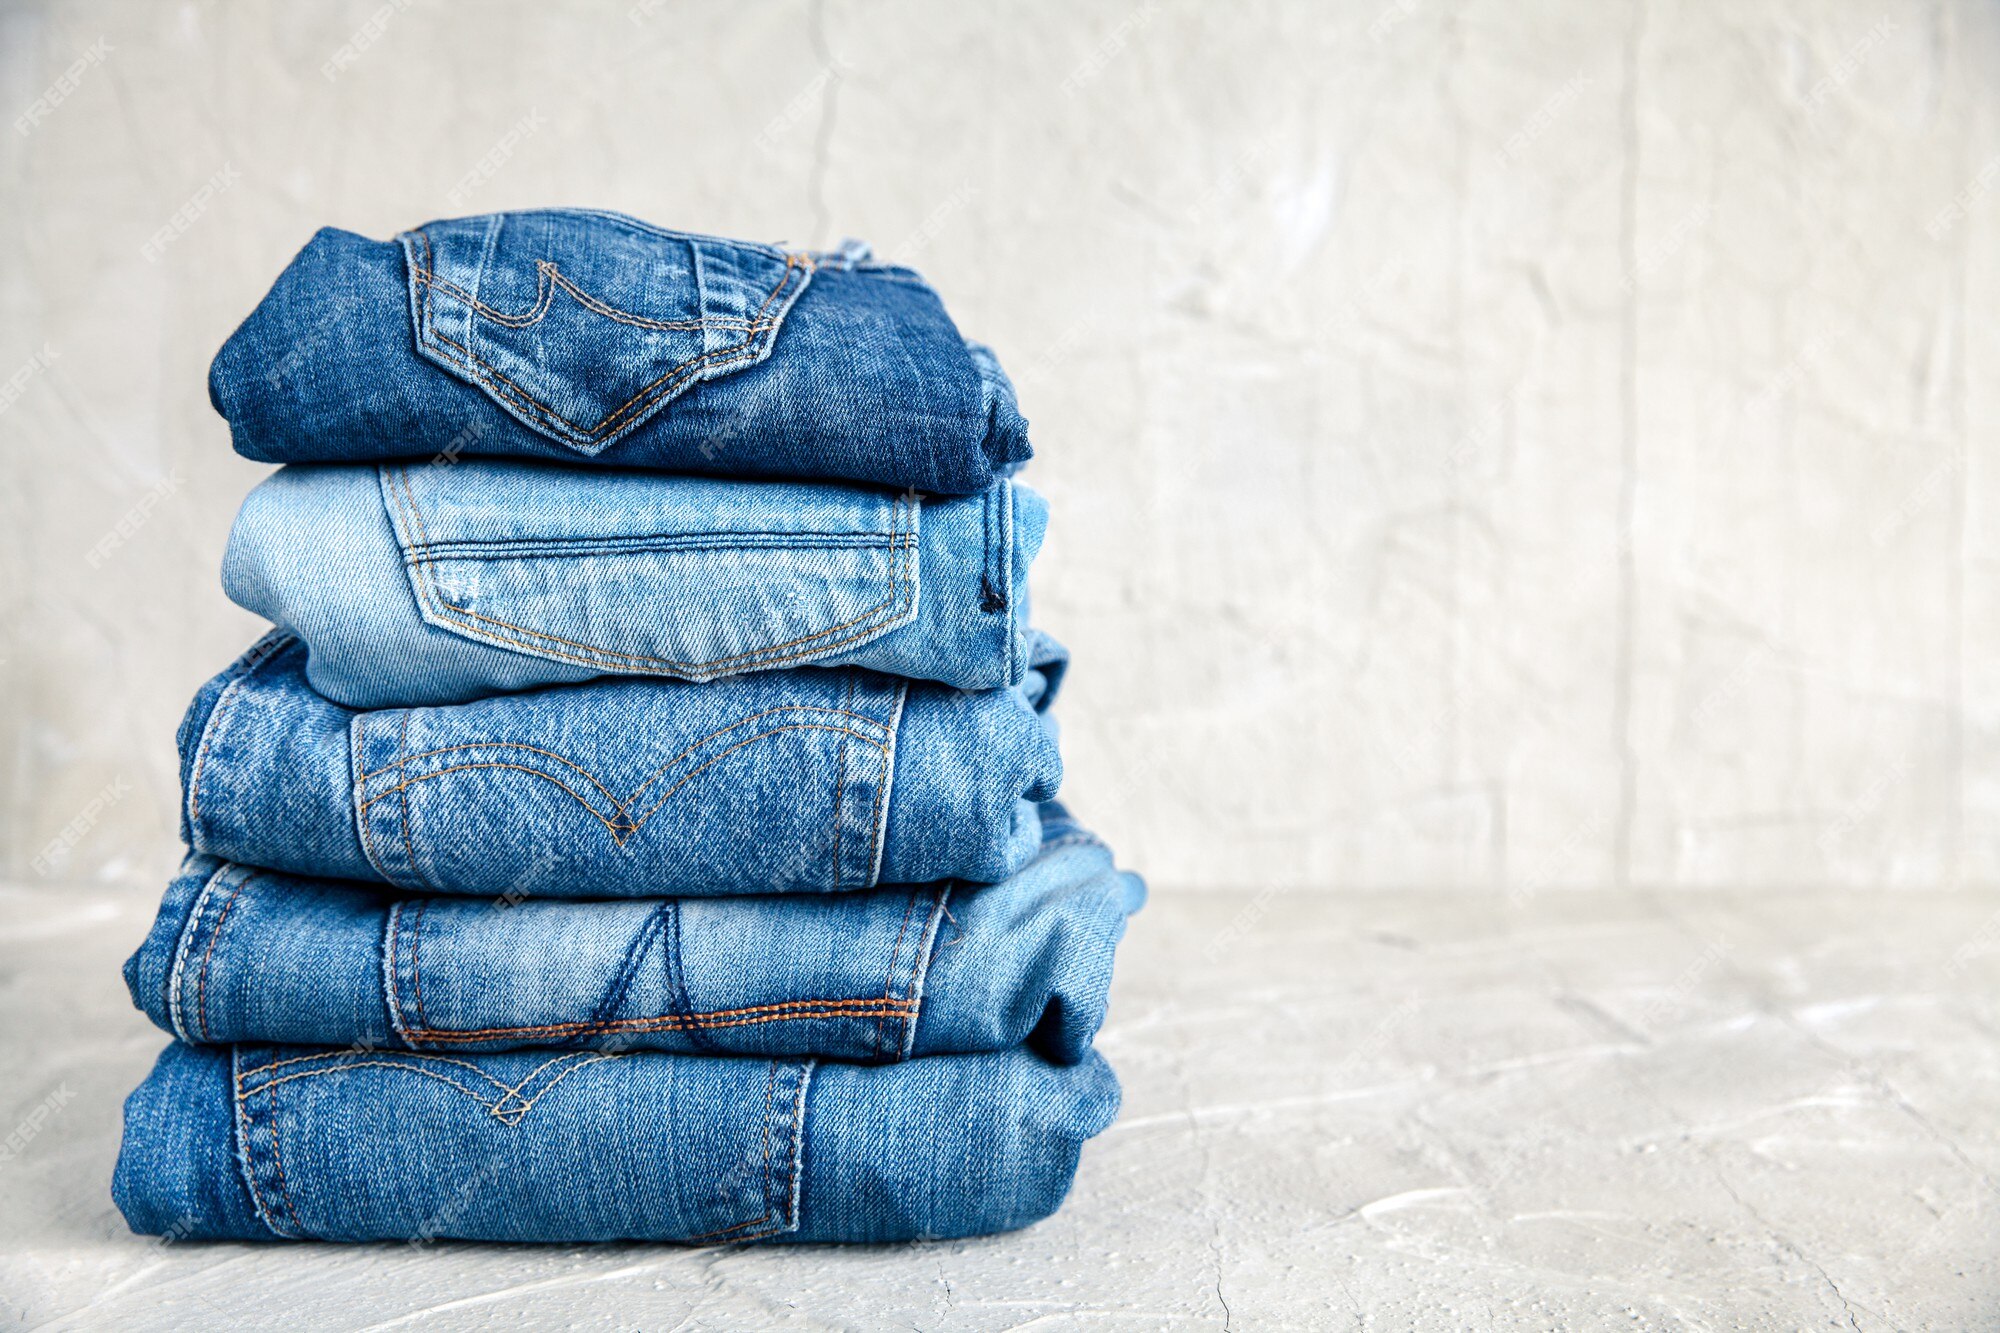 Premium Photo | Stack of blue jeans on a gray background